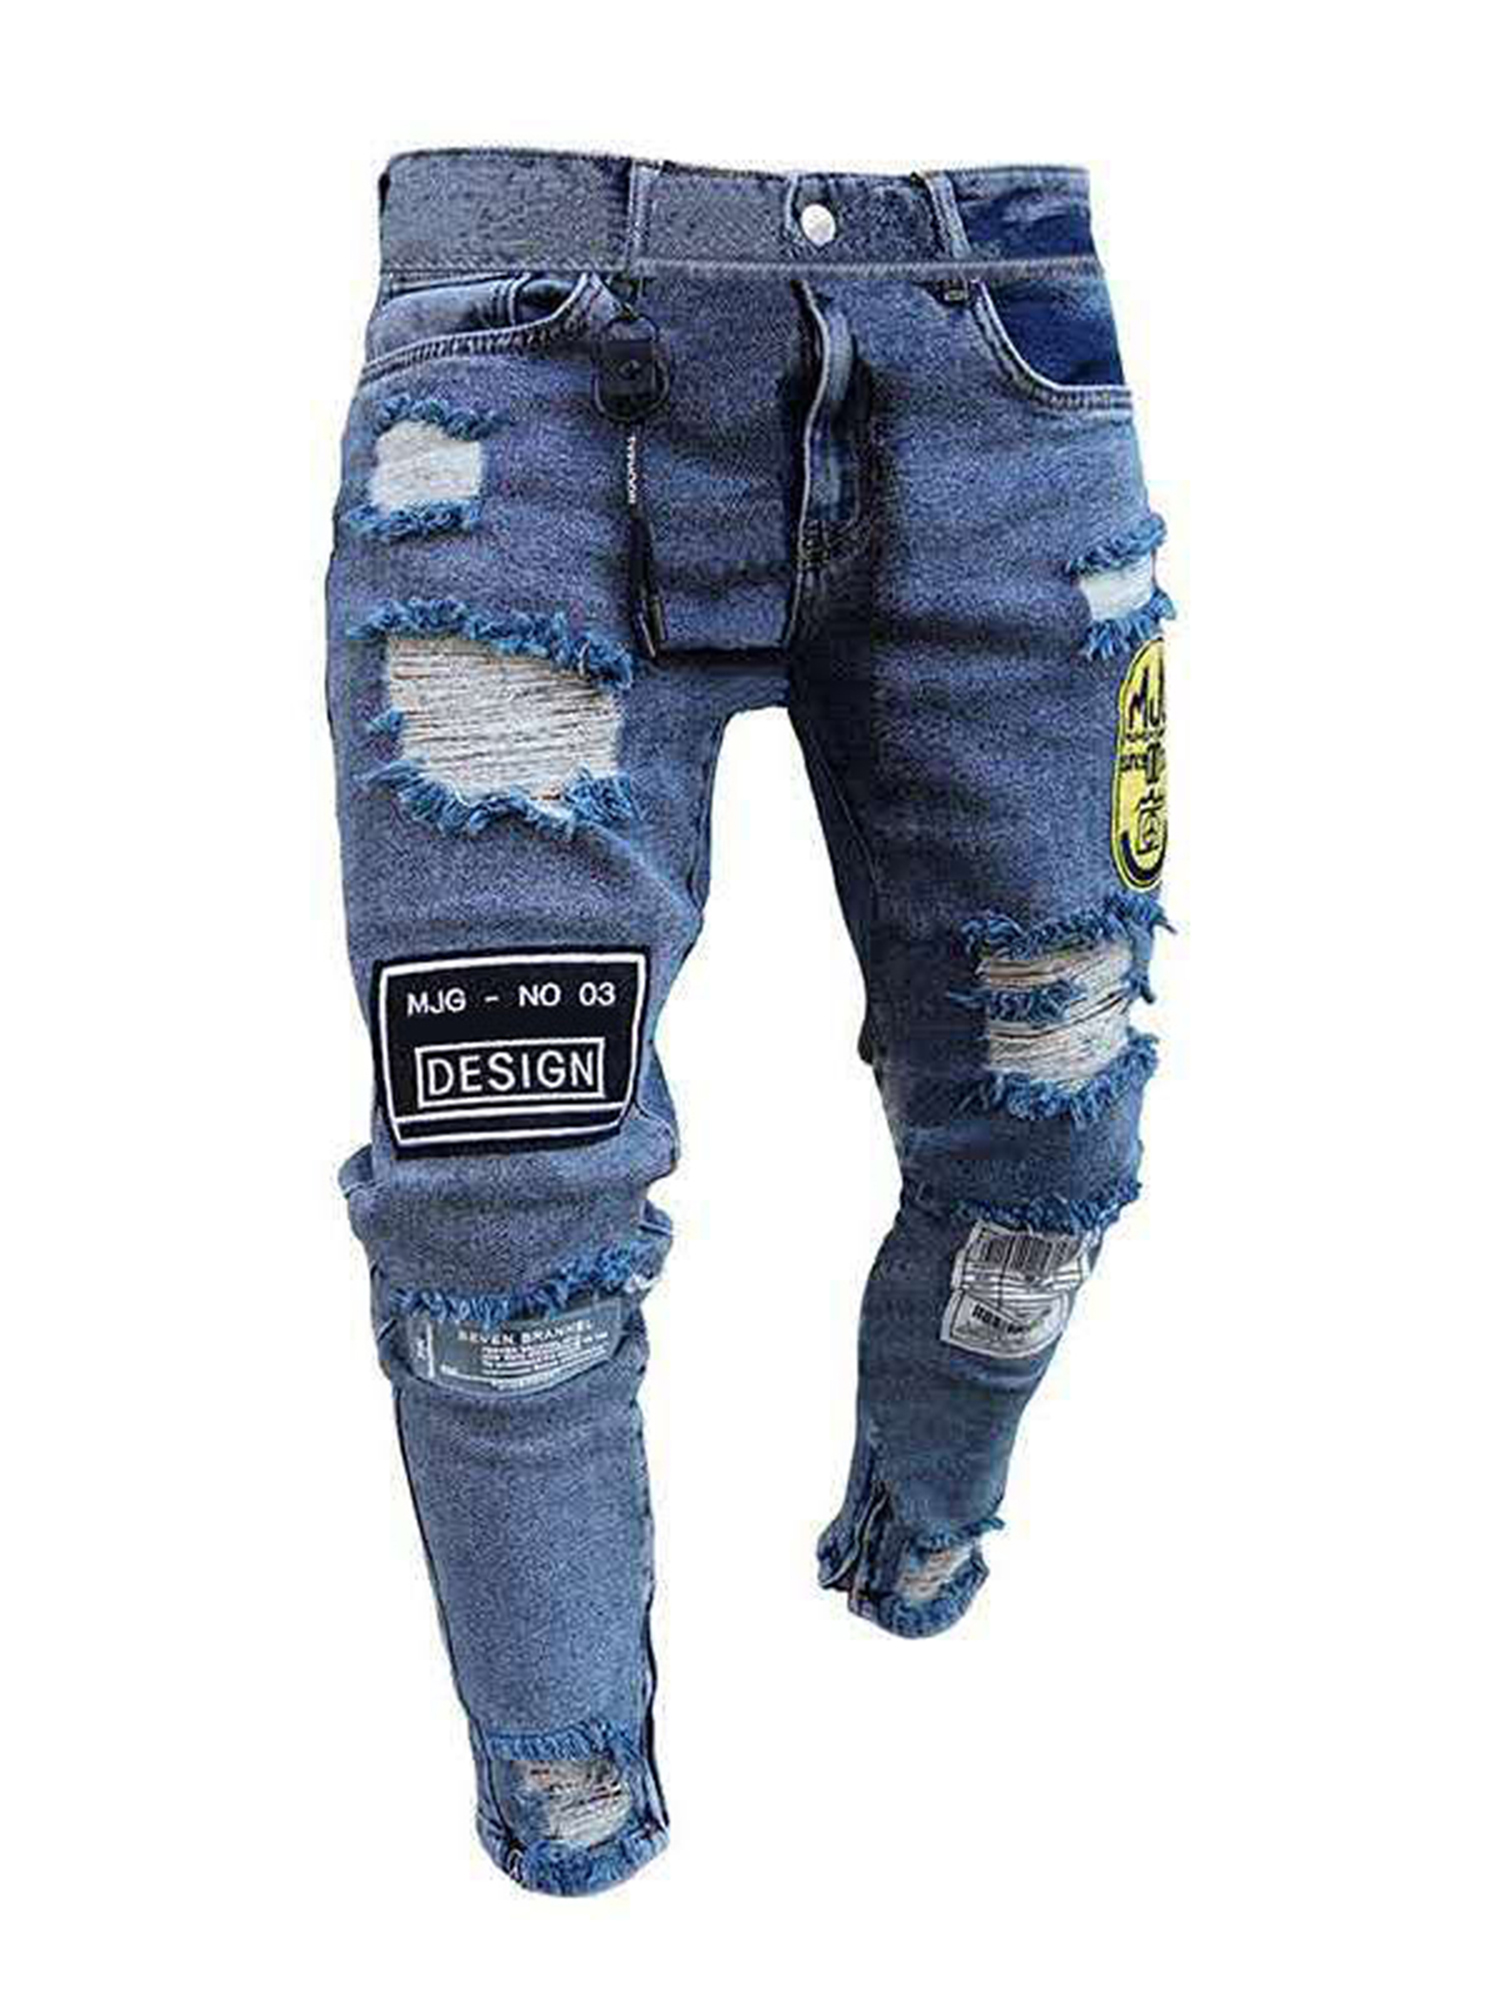 ripped jeans no skin showing